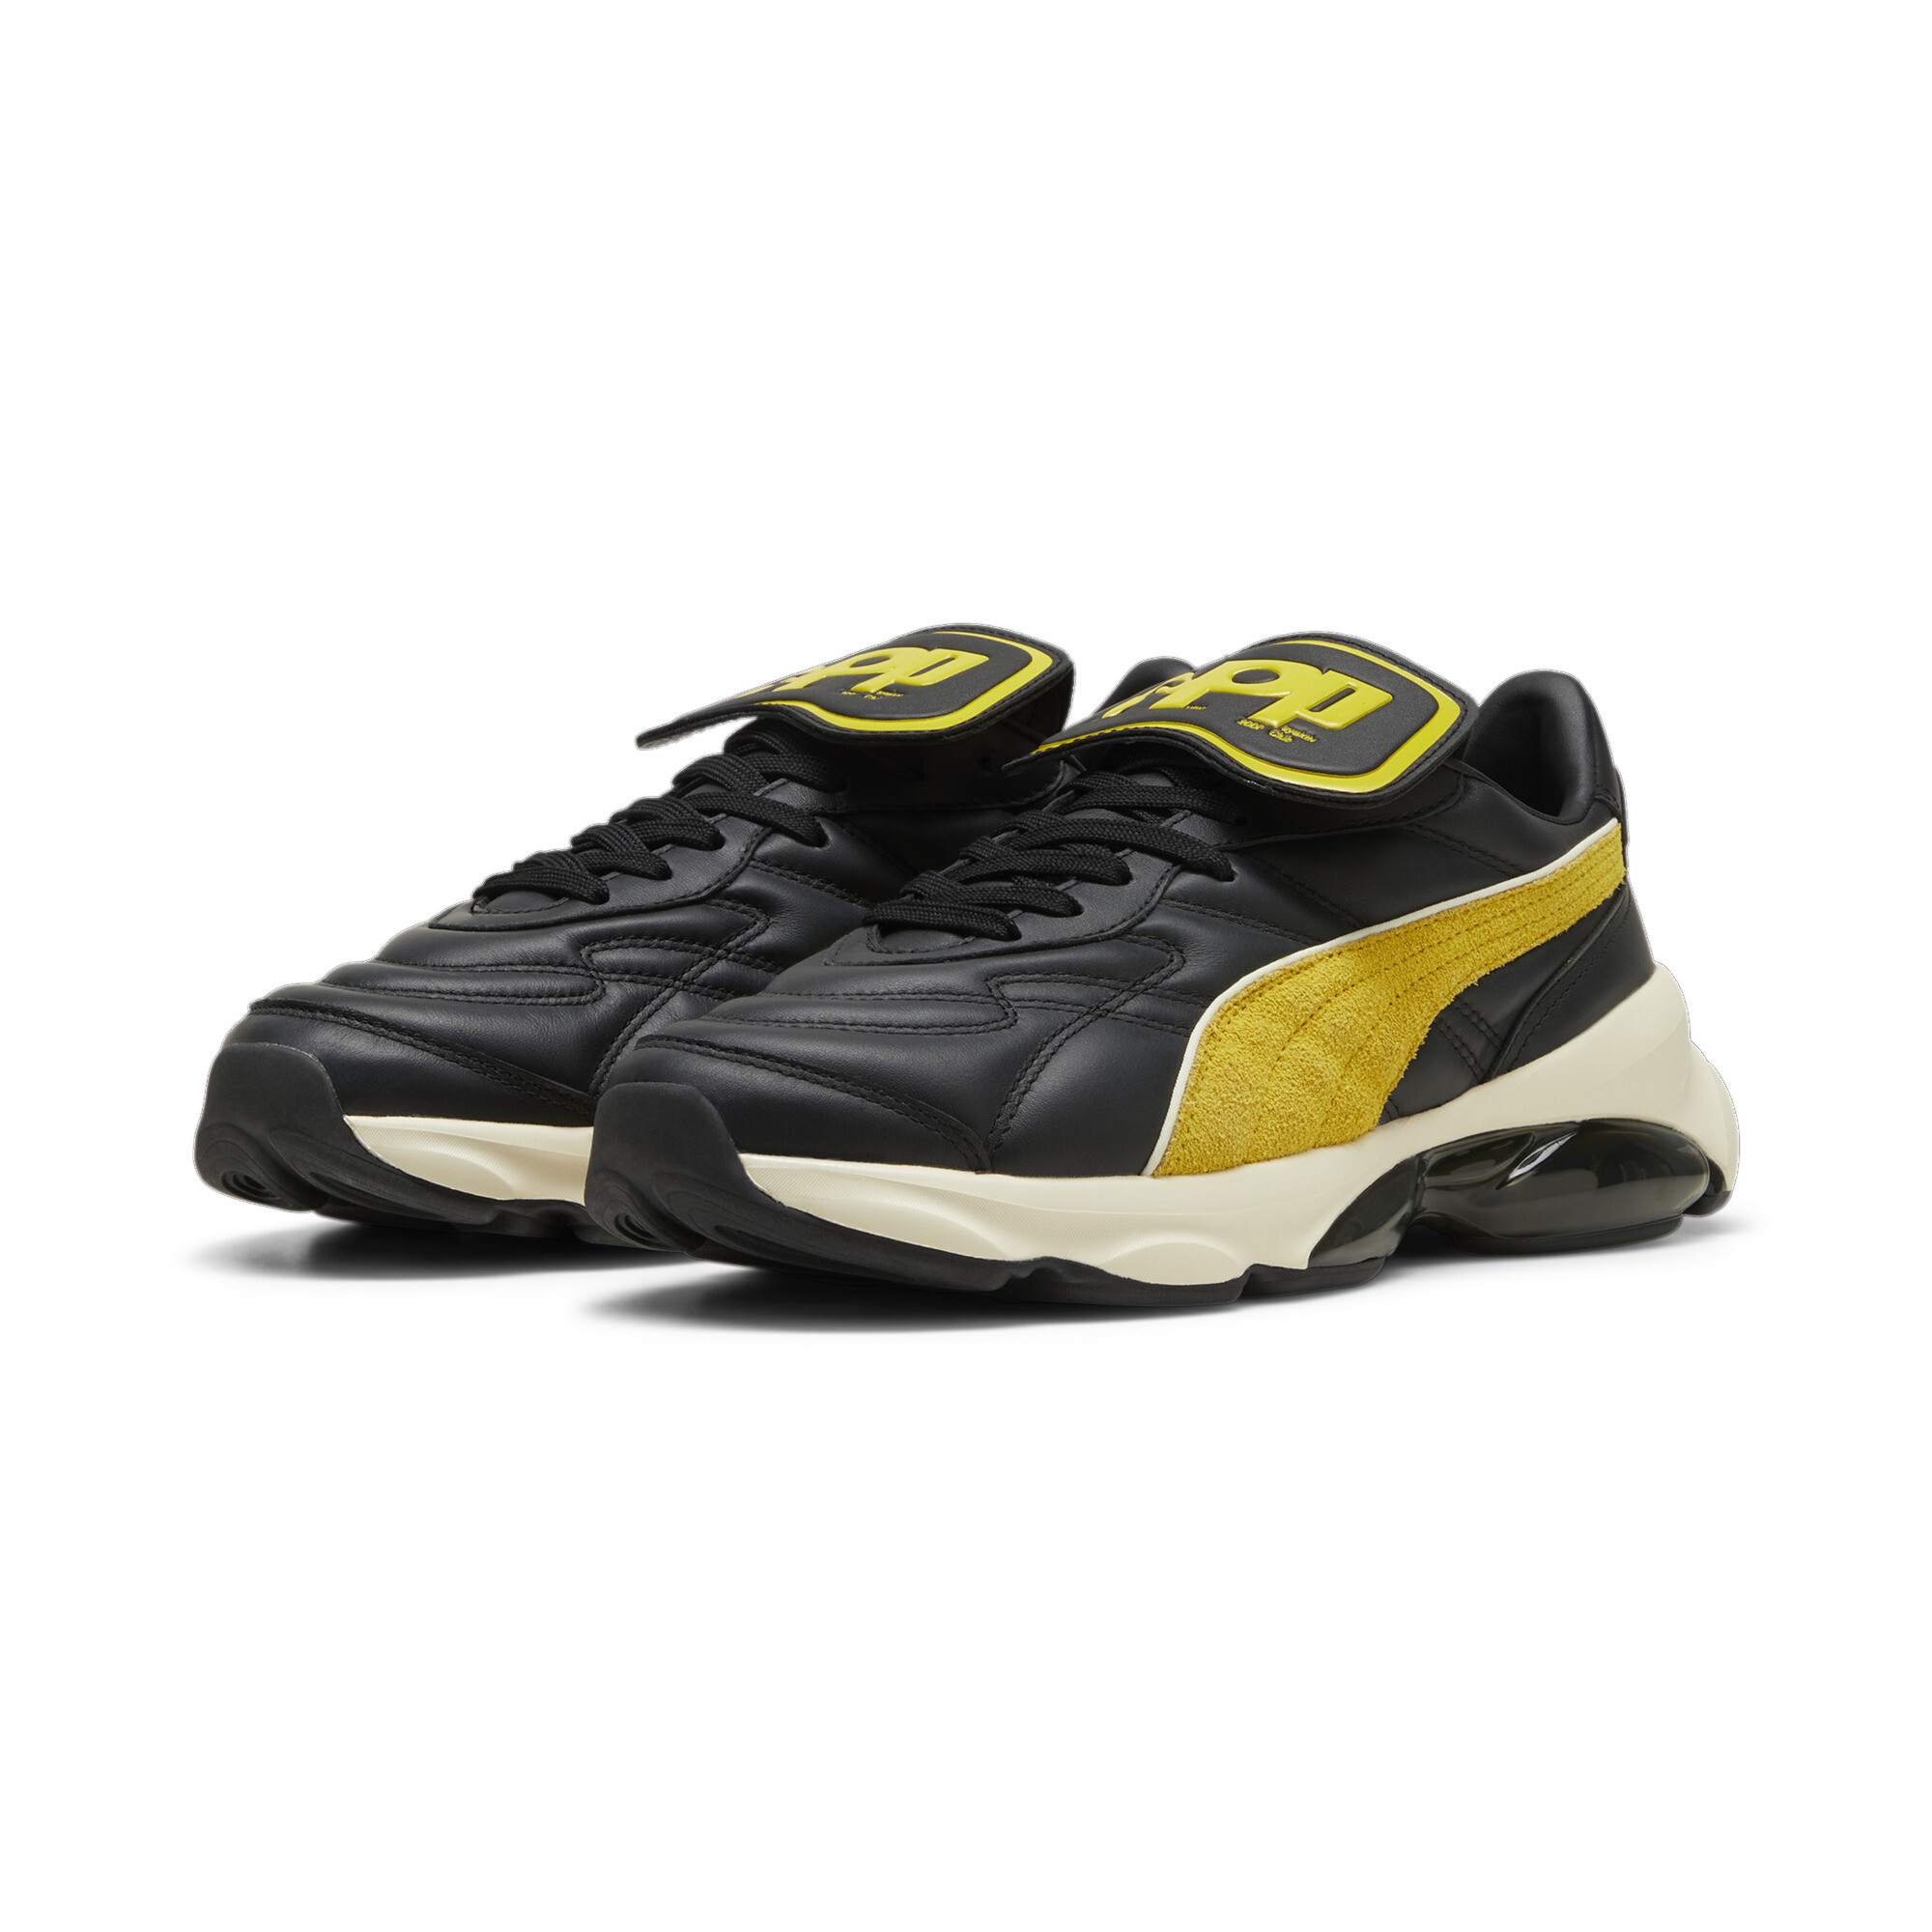 Puma X PERKS AND MINI Cell Dome KING Sneaker, Black, Size 35.5, Shoes